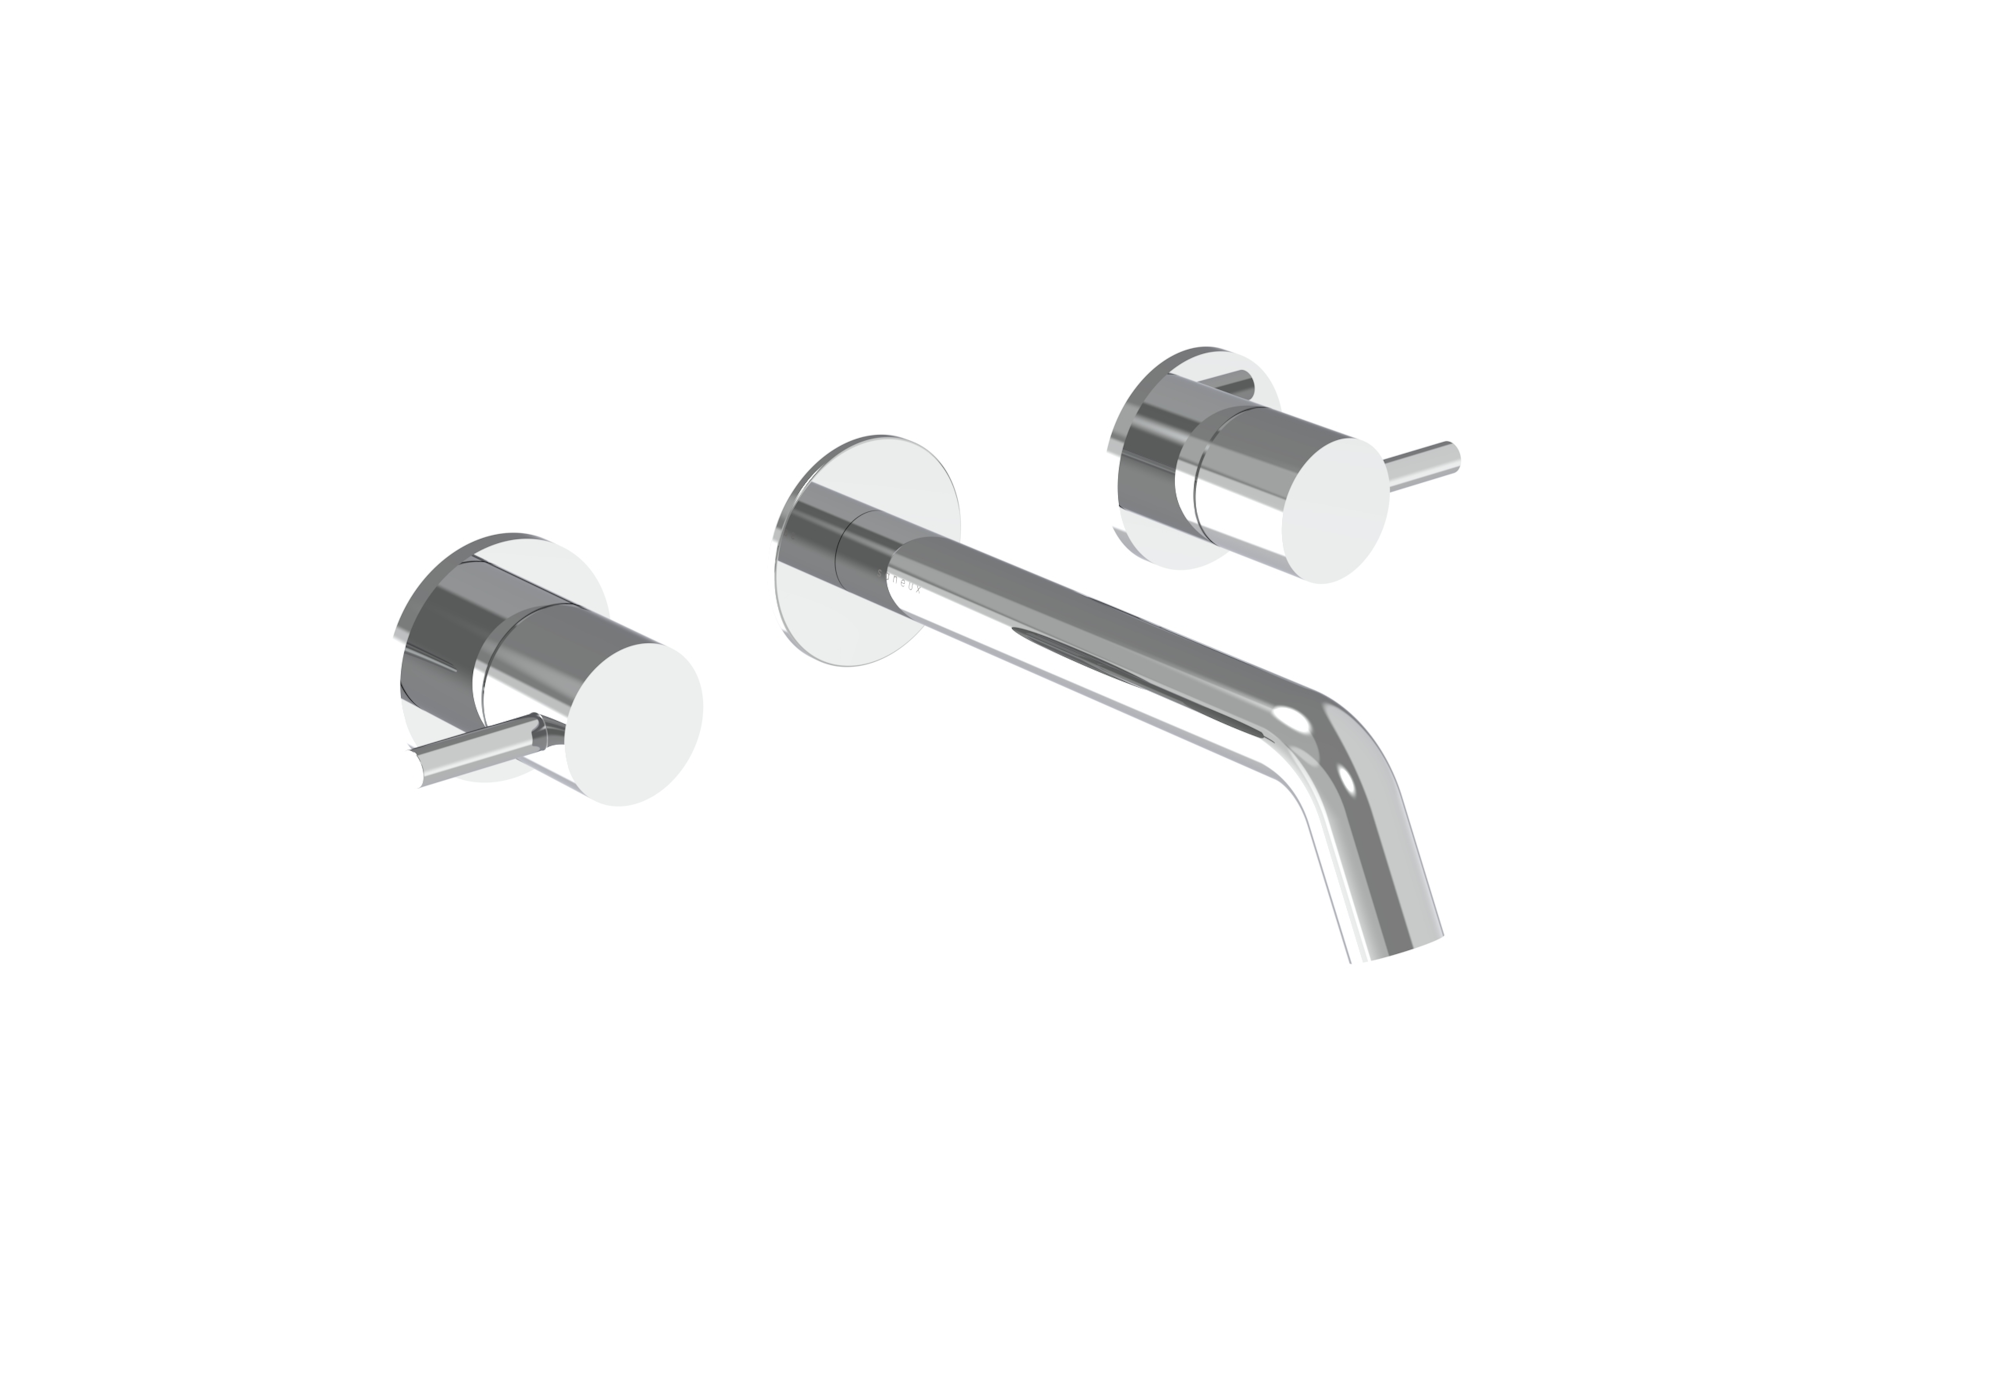 COS 3 Tap Hole Wall mounted KIT - w/ Classic spout (170mm) w/ Classic handle - Chrome